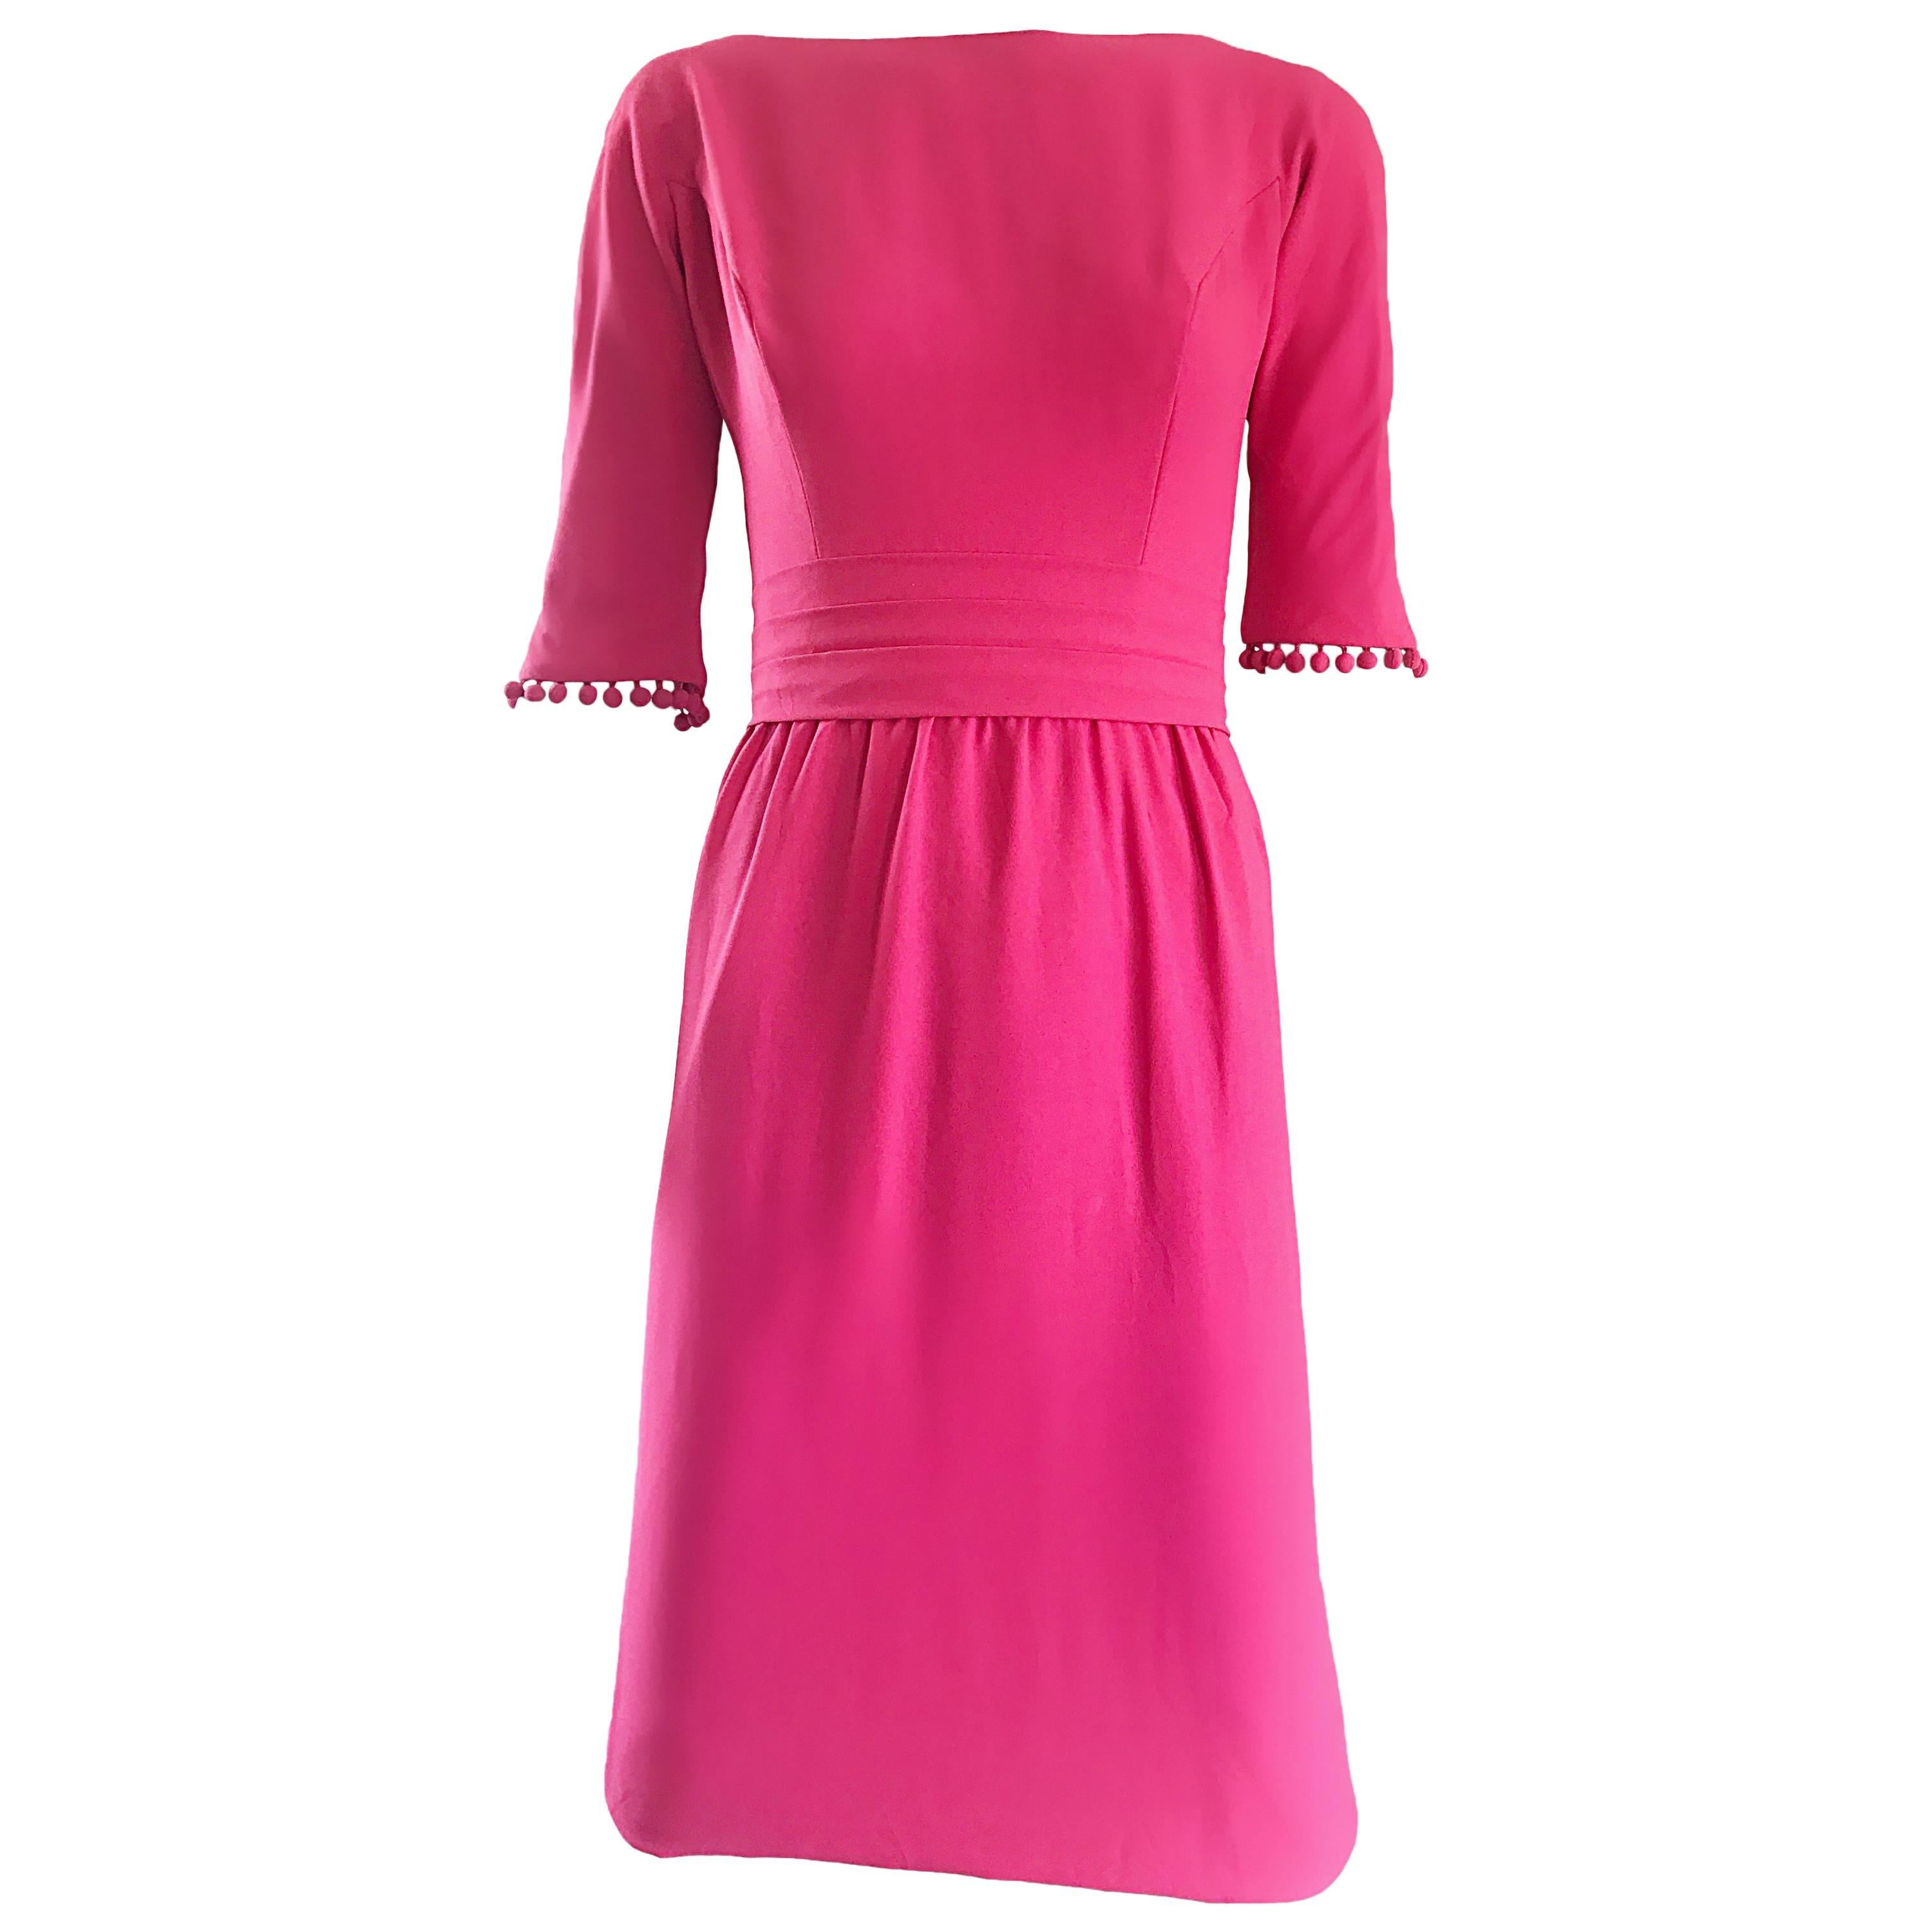 Beautiful 1950s Demi Couture Raspberry Pink 3/4 Sleeves Vintage 50s Crepe Dress  For Sale